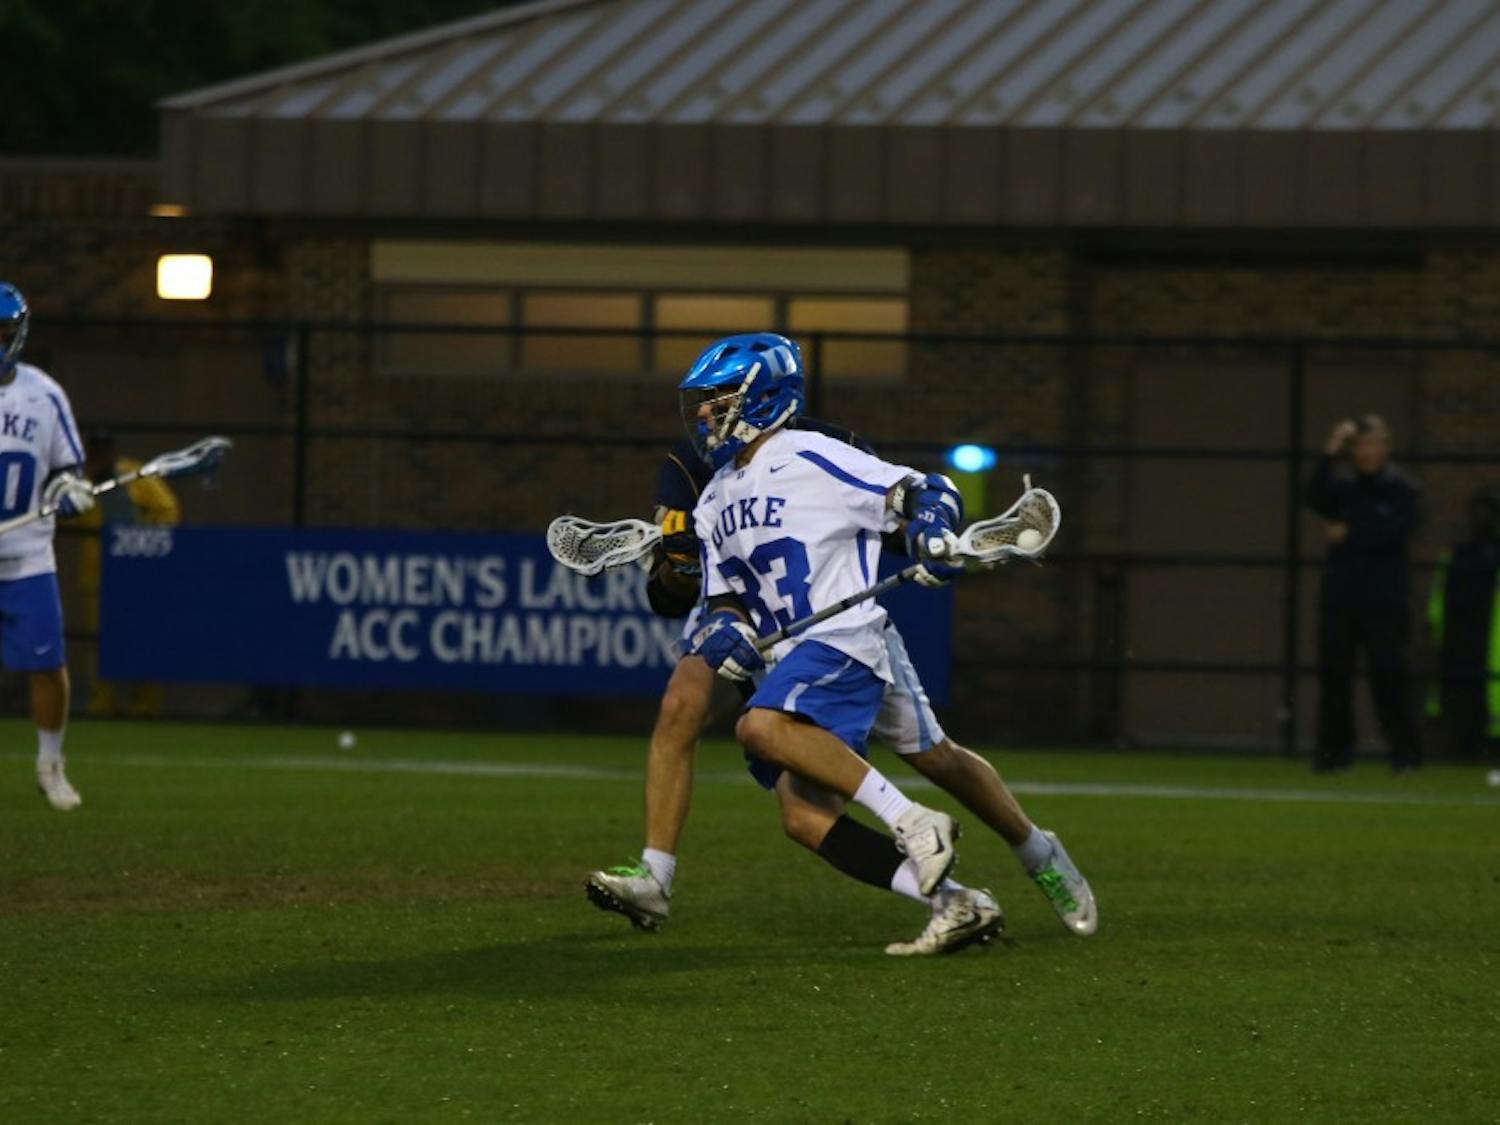 Sophomore Justin Guterding spearheaded the Duke attack against the Golden Eagles, contributing three goals and three assists in a game the Blue Devils had to win.